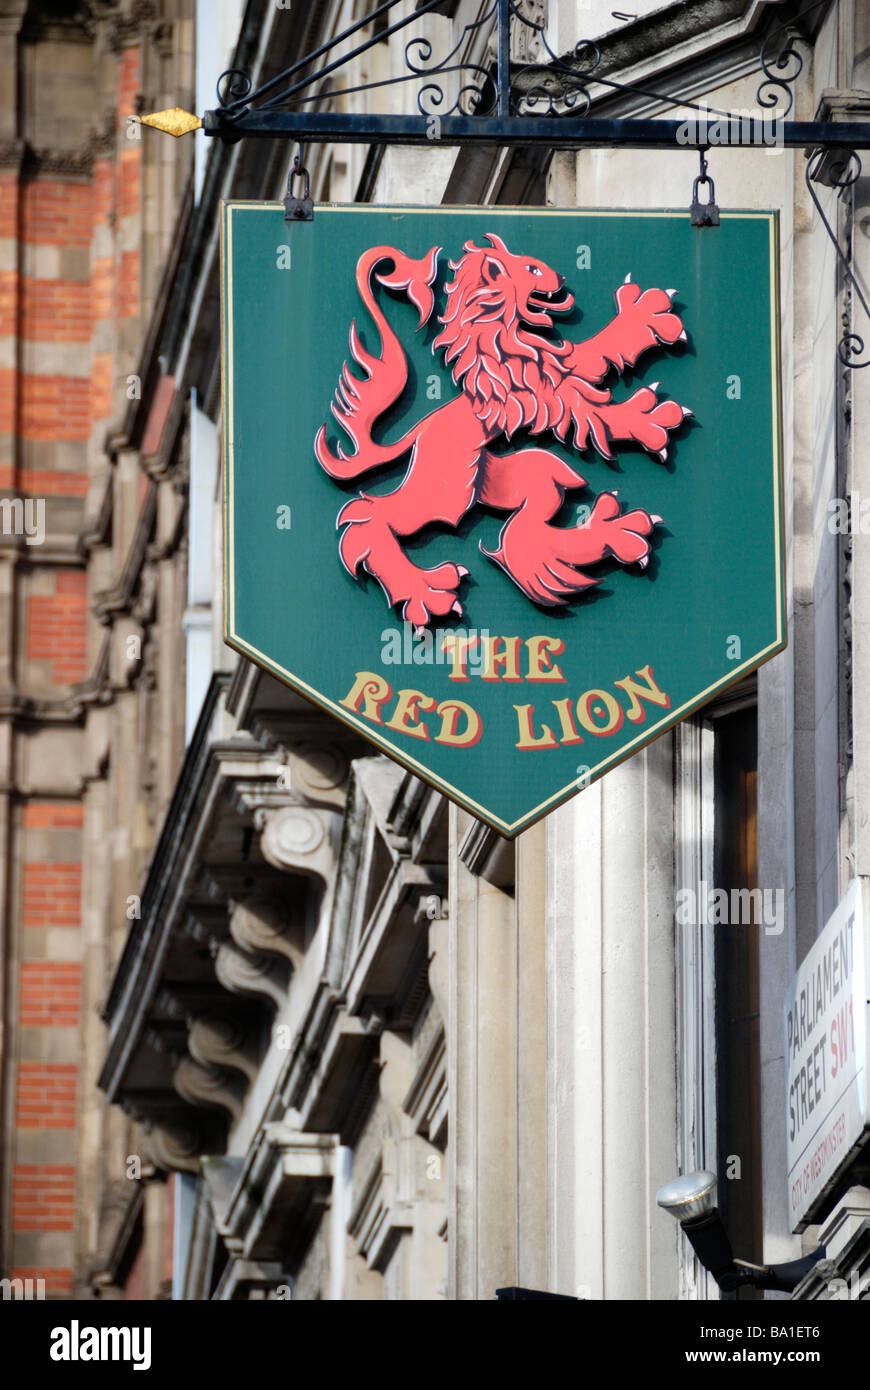 Red Lion pub in Parliament Street Whitehall London Stock Photo